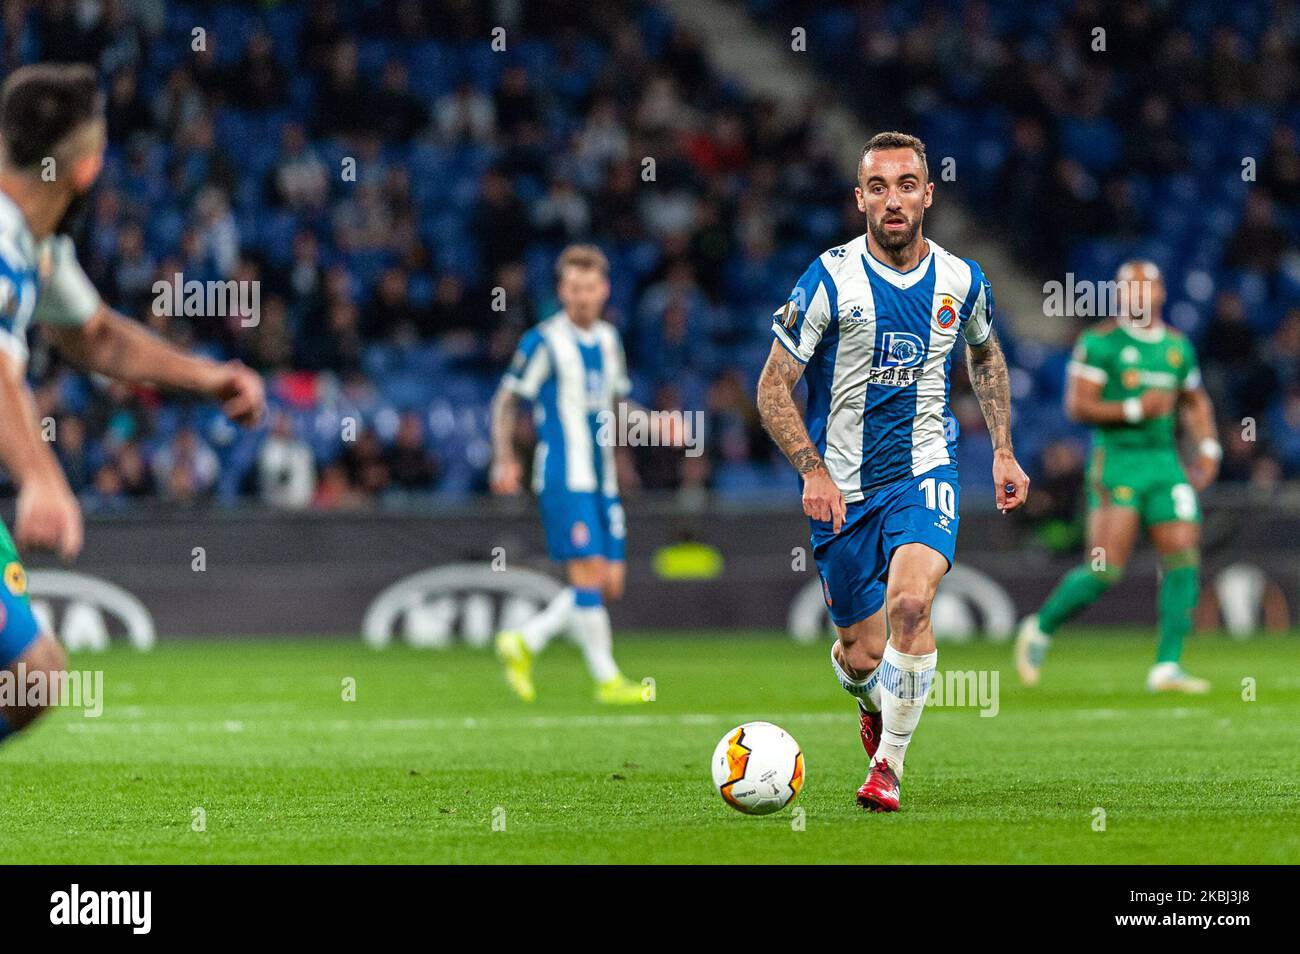 Sergi Darder during the match between RCD Espanyol and Wolverhampton Wanderers FC, corresponding to the second leg of the round of 32 of the Europa League, played at the RCDE Stadium, on 27th February 2020, in Barcelona, Spain. (Photo by Xavier Ballart/Urbanandsport/NurPhoto) Stock Photo